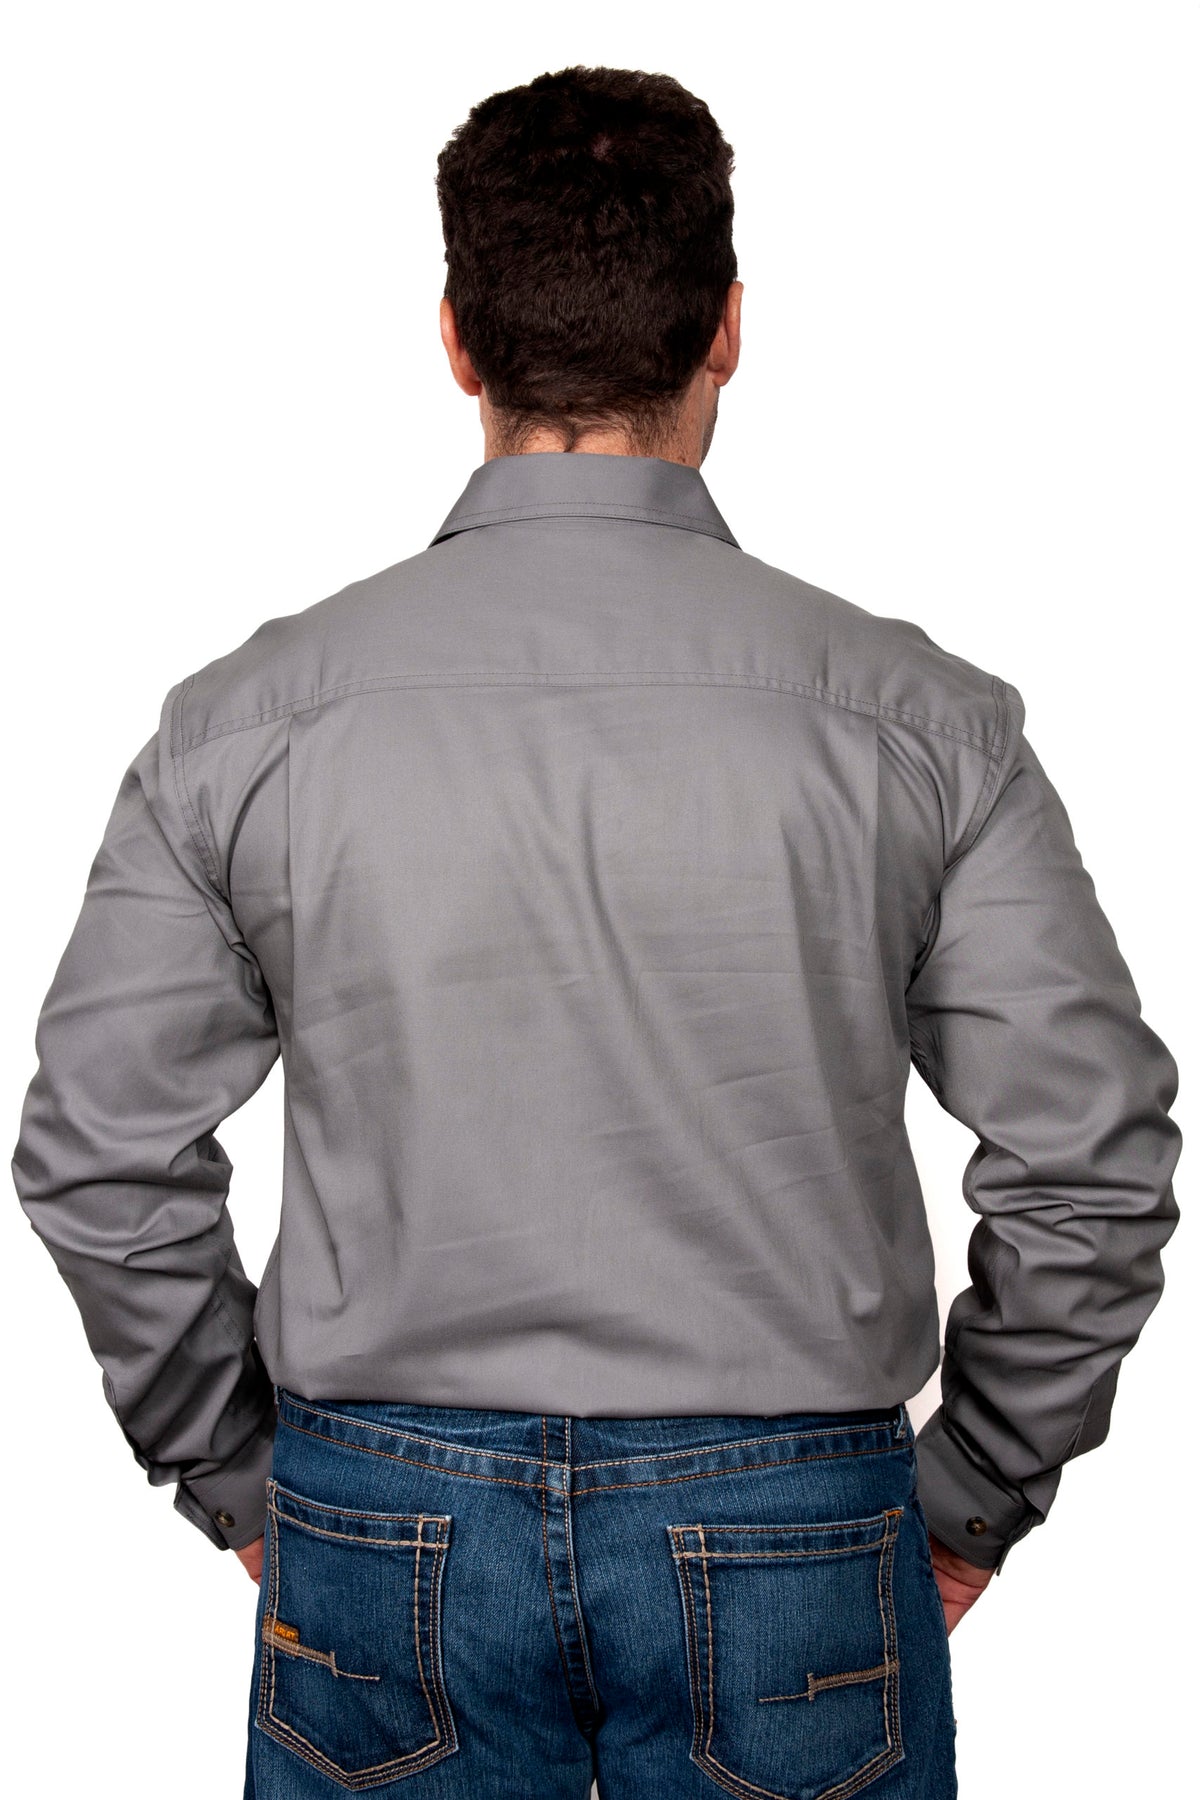 Just Country Mens Cameron Workshirt - Steel Grey